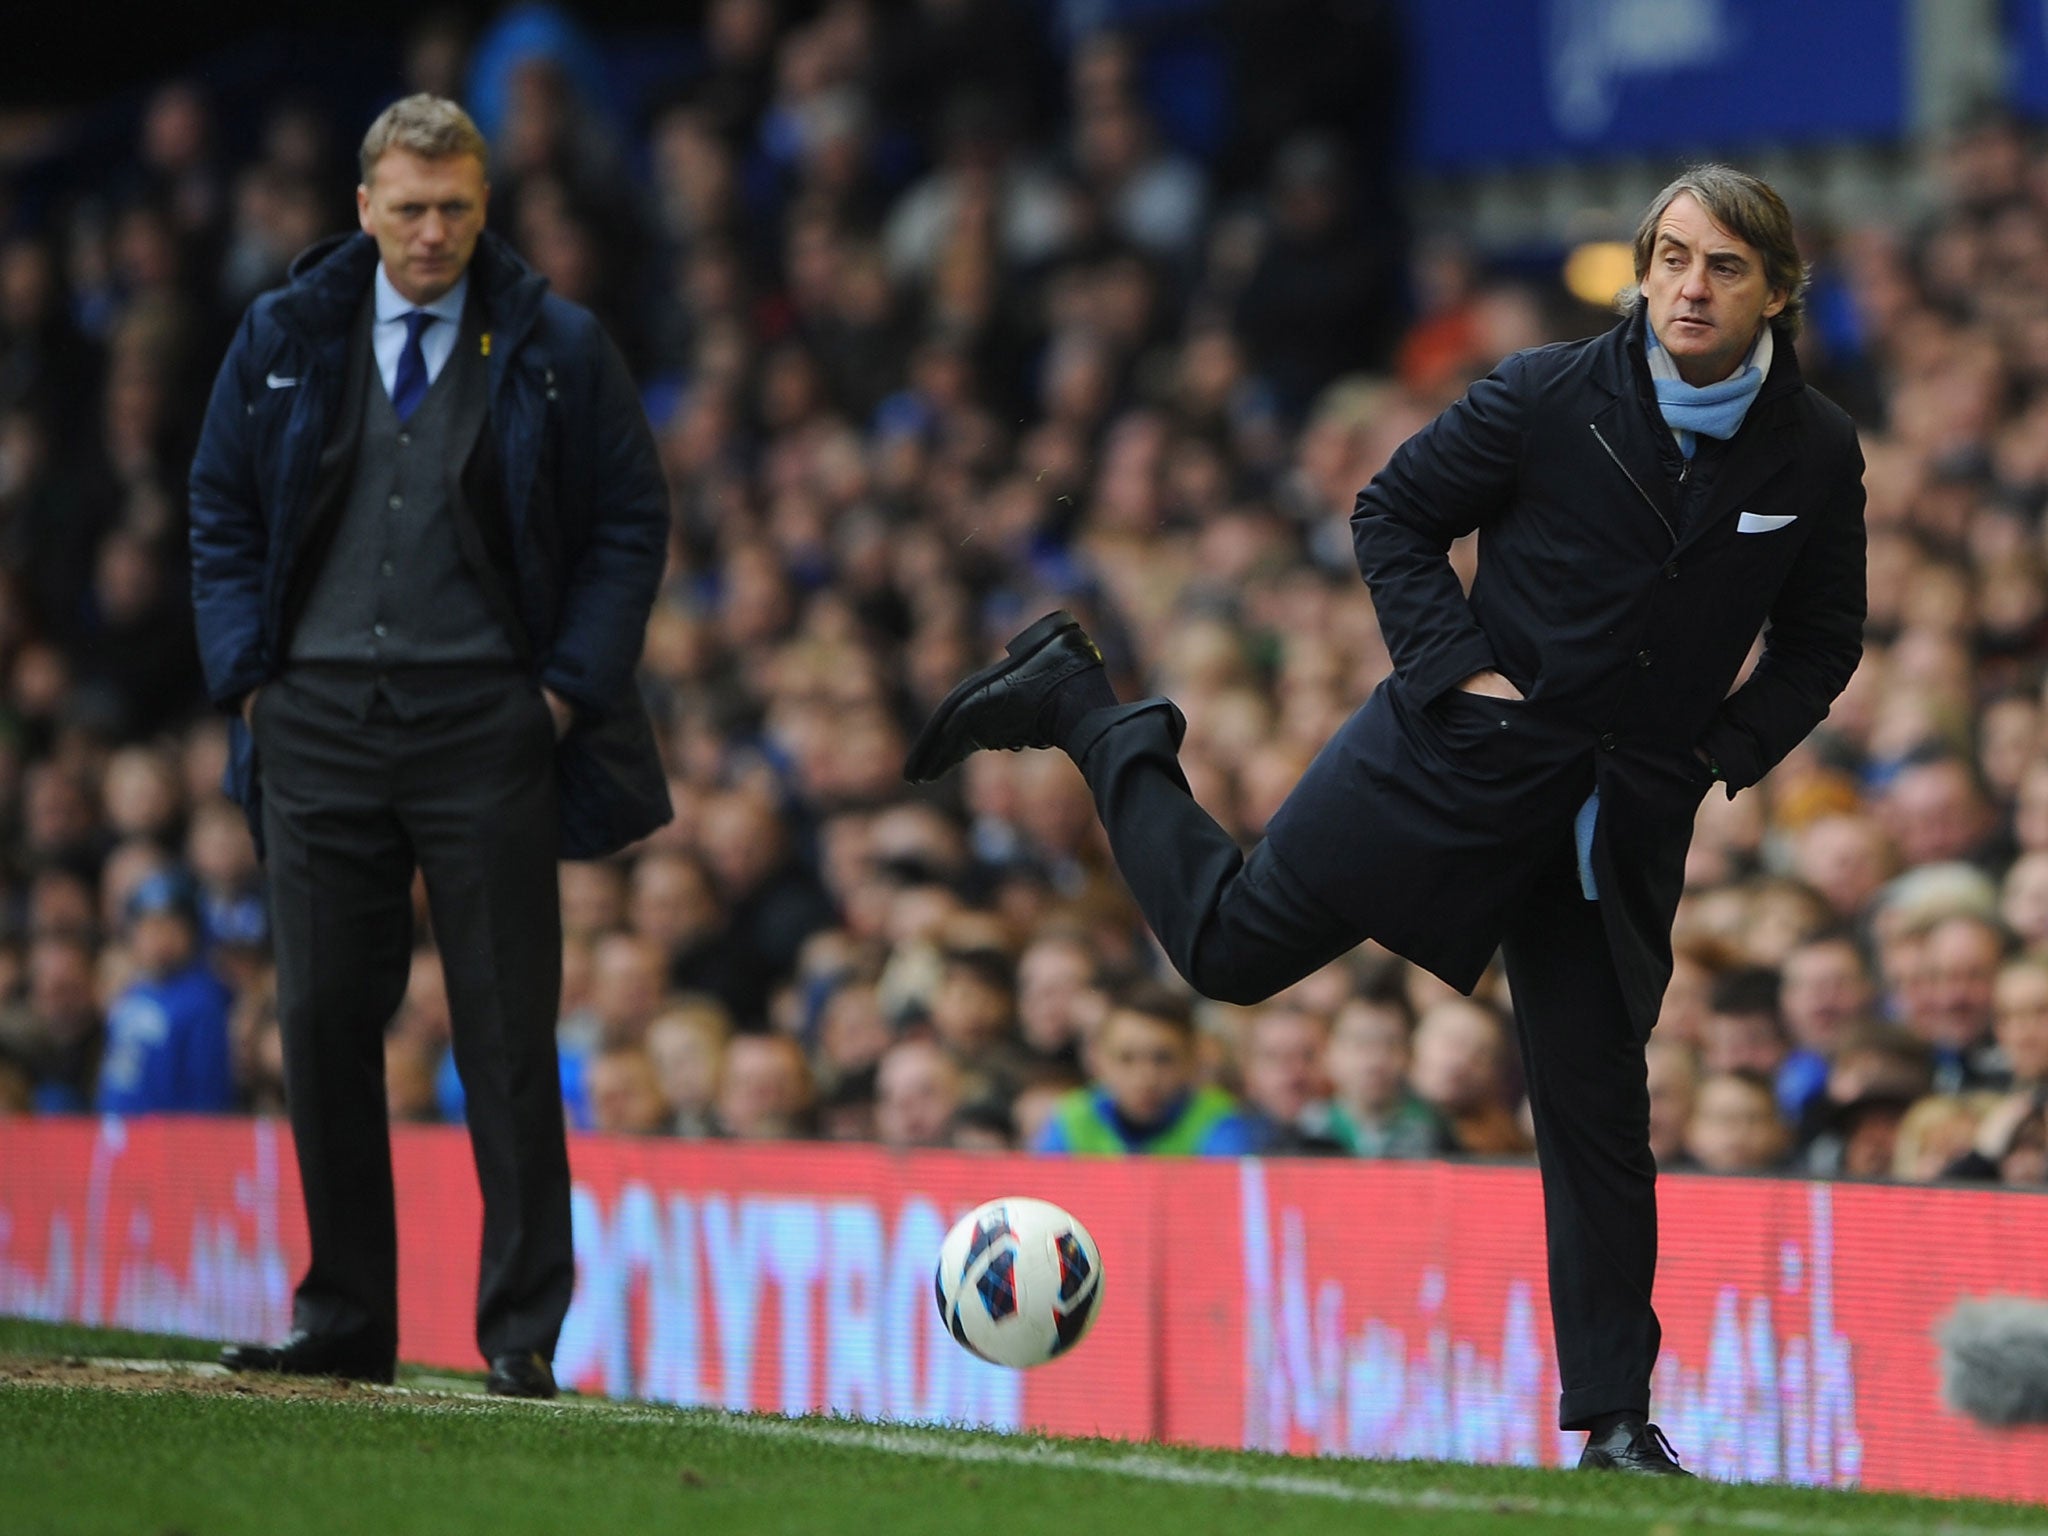 Manchester City Manager Roberto Mancini controls the ball as Everton Manager David Moyes looks on